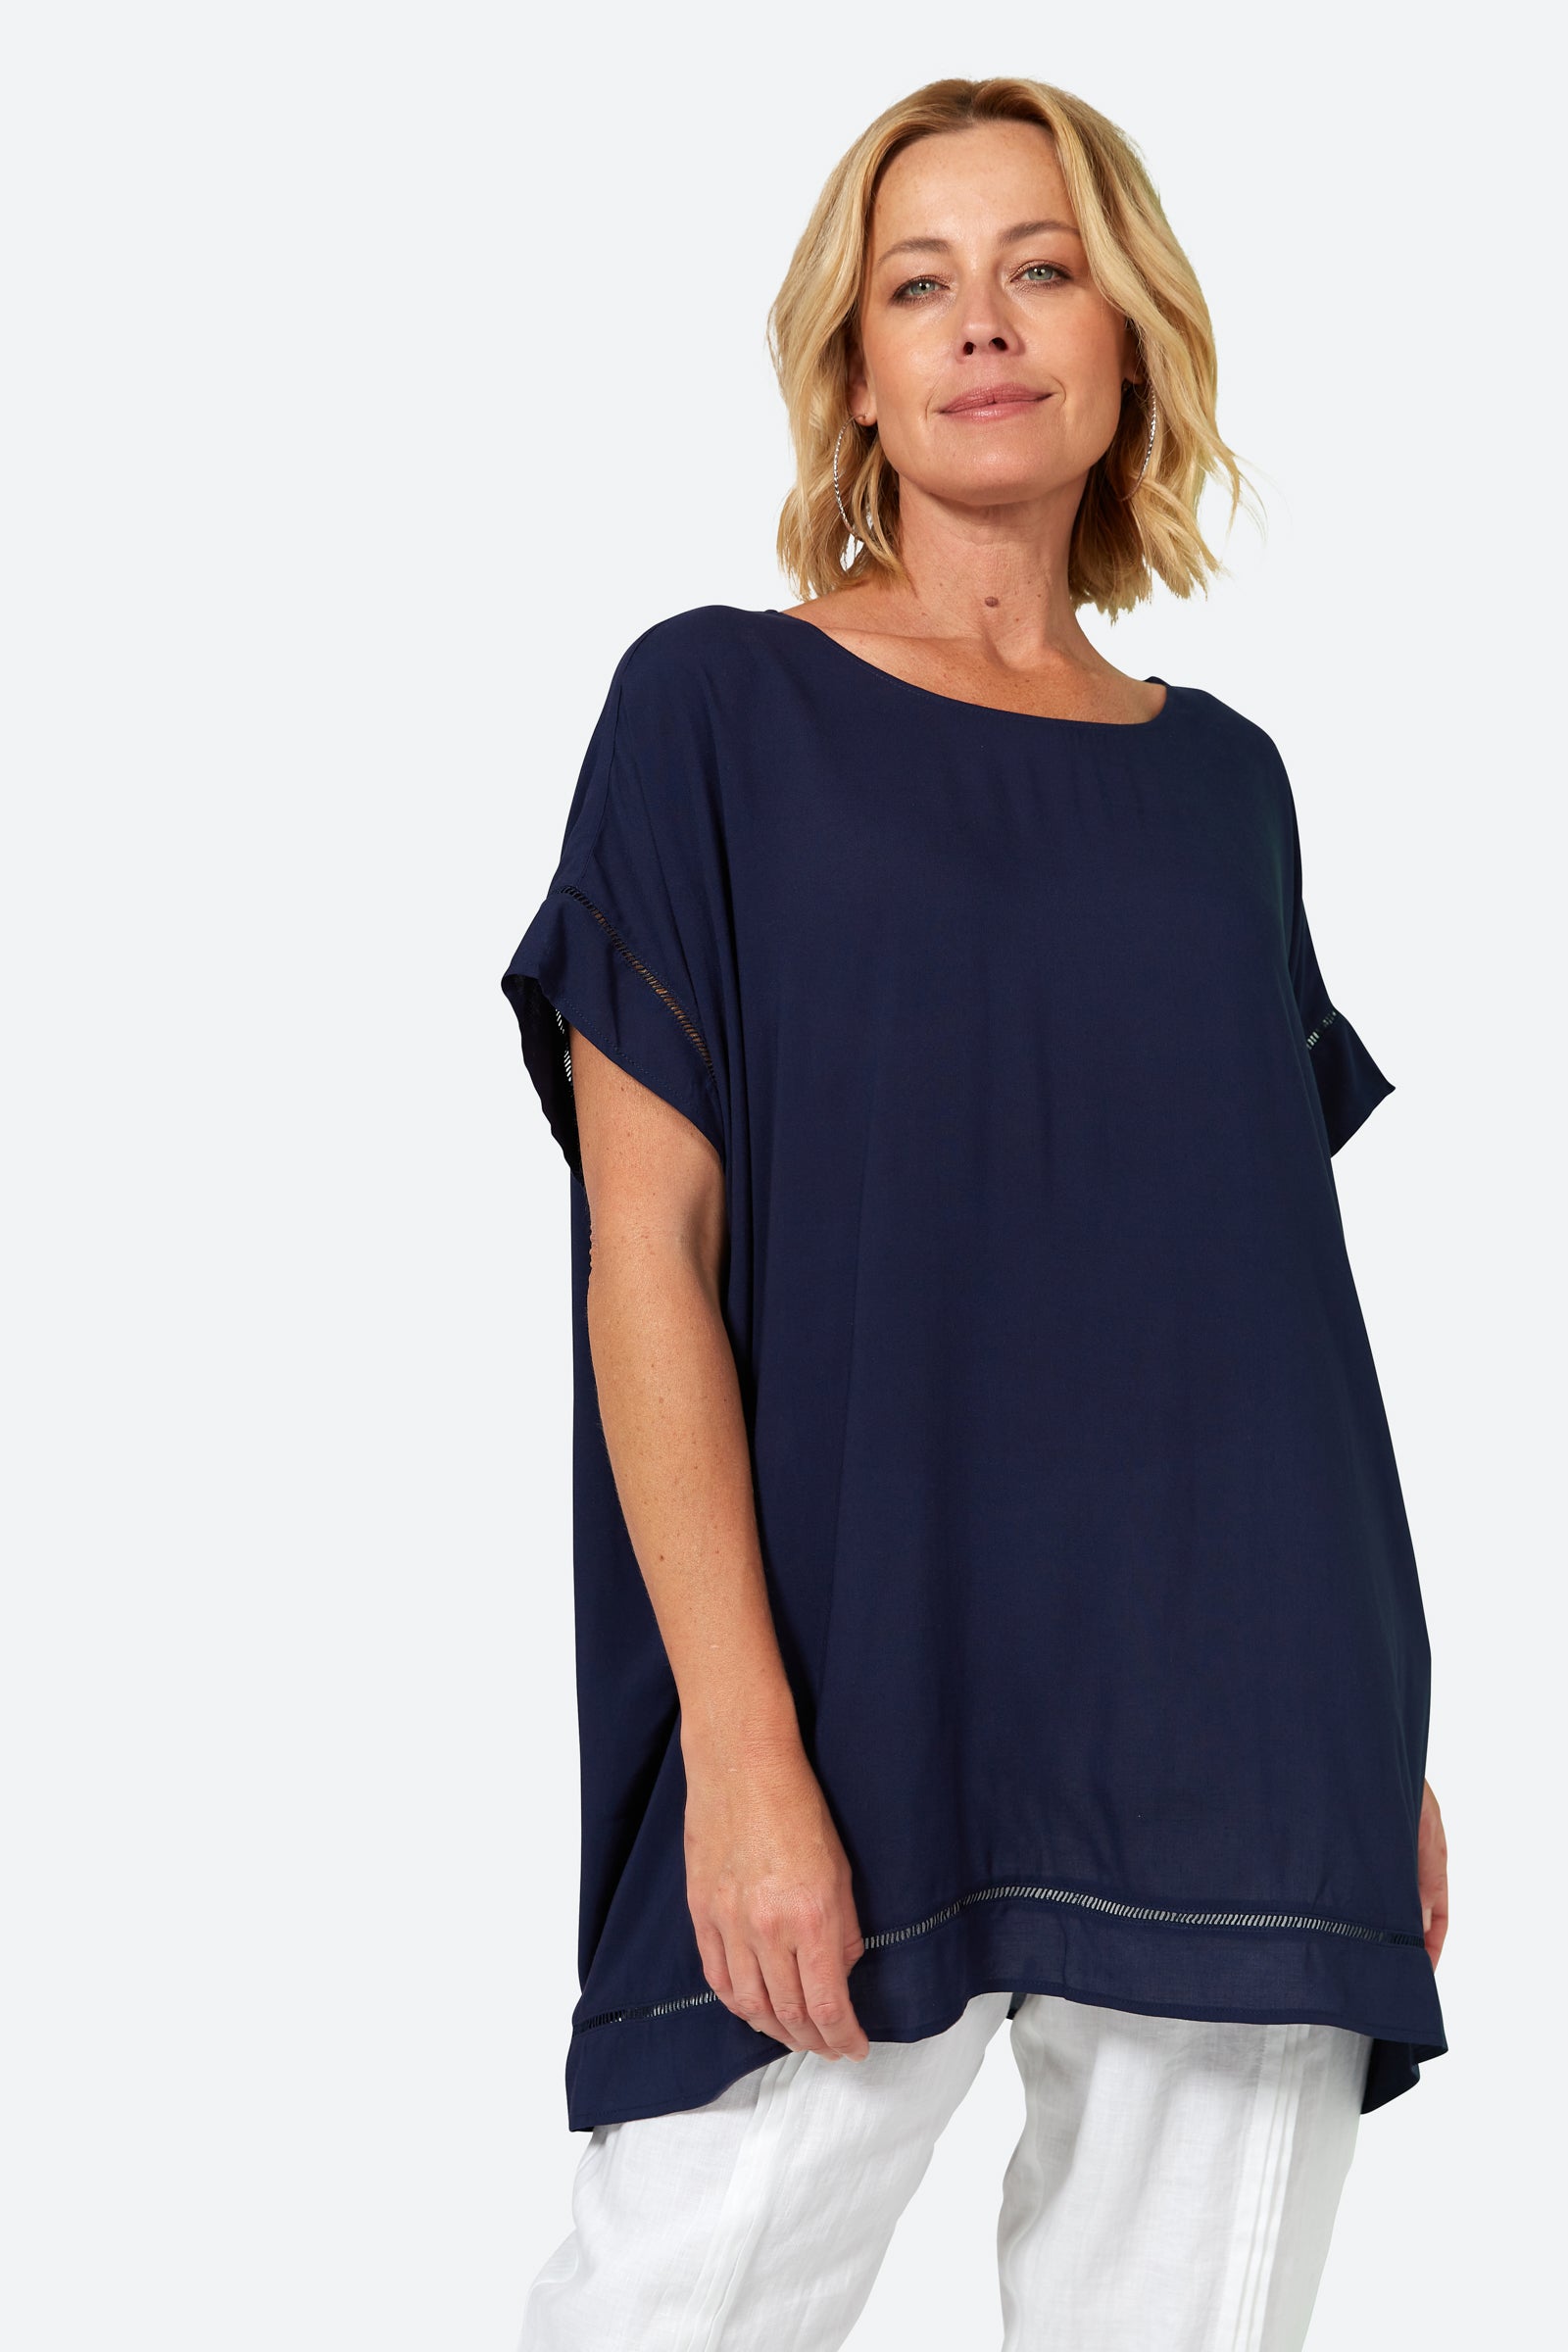 Esprit Relax Top - Sapphire - eb&ive Clothing - Top S/S One Size